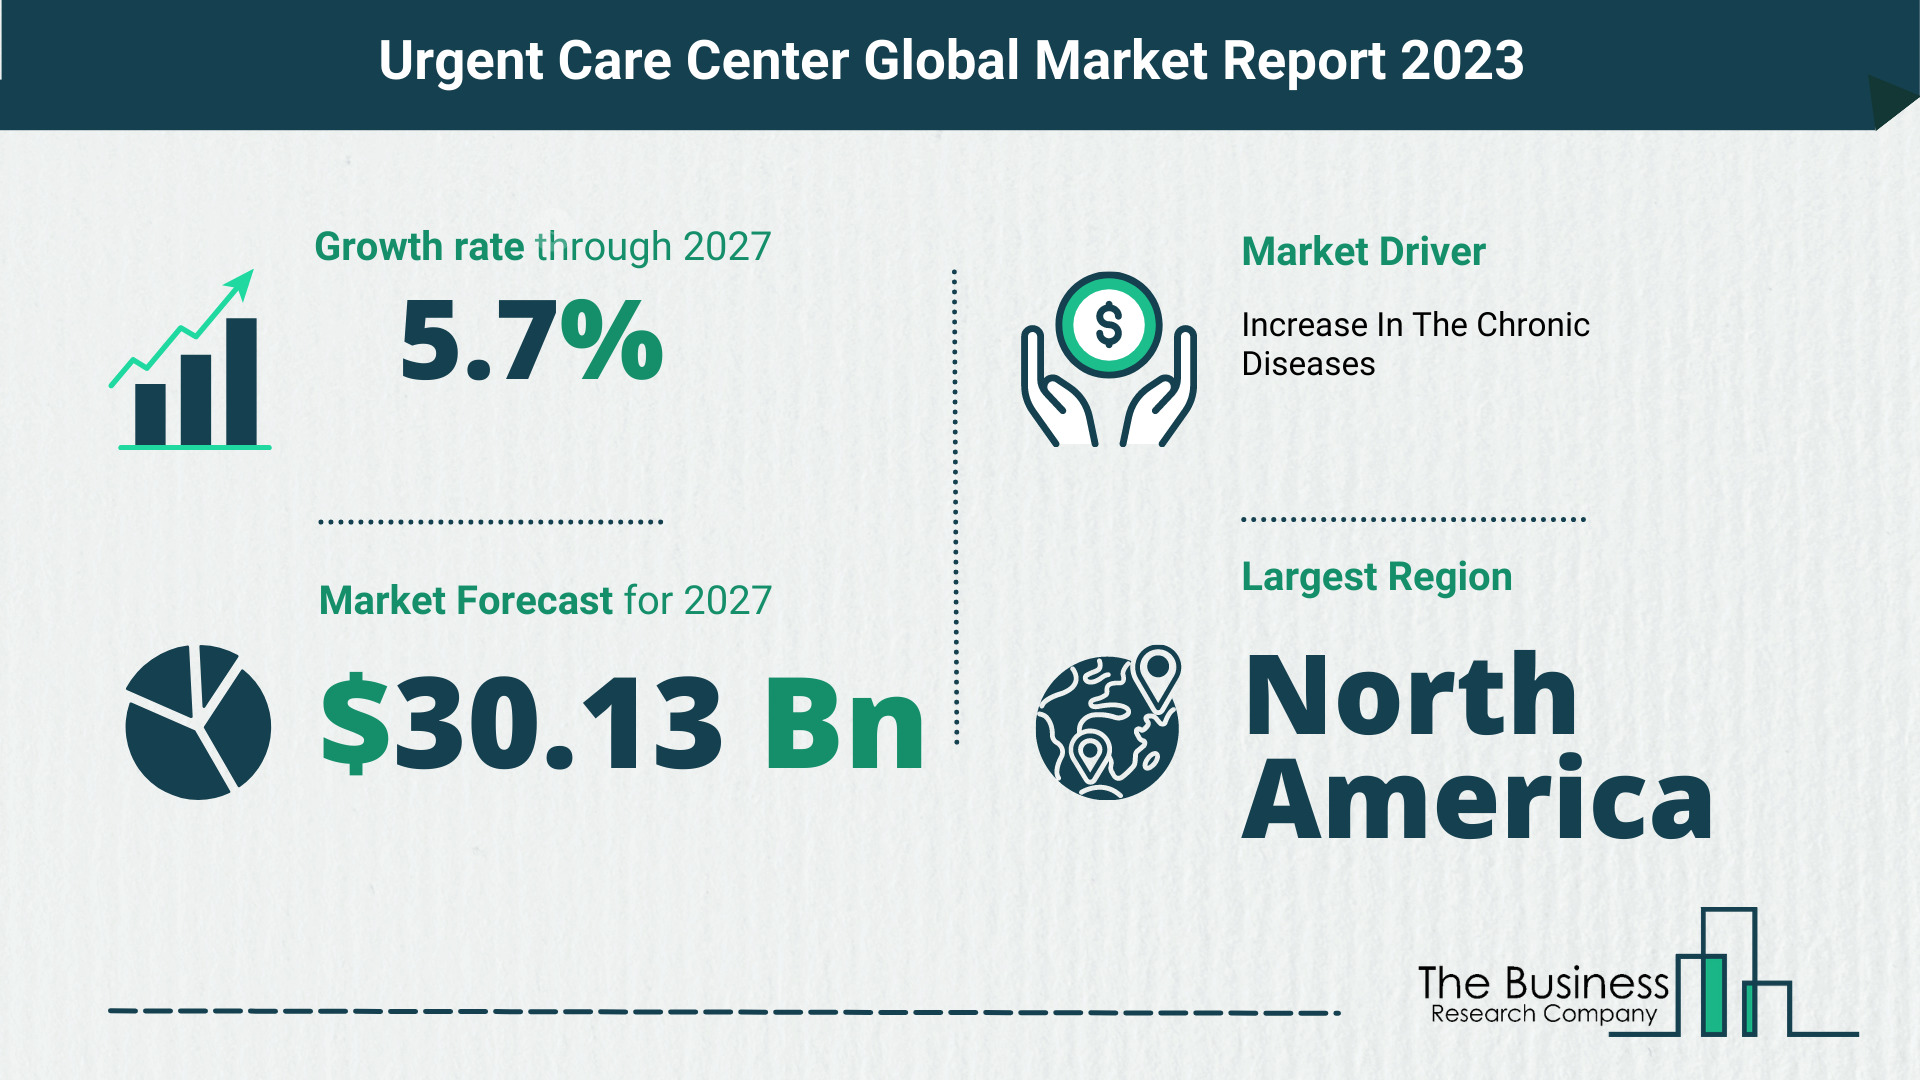 What Will The Urgent Care Center Market Look Like In 2023?